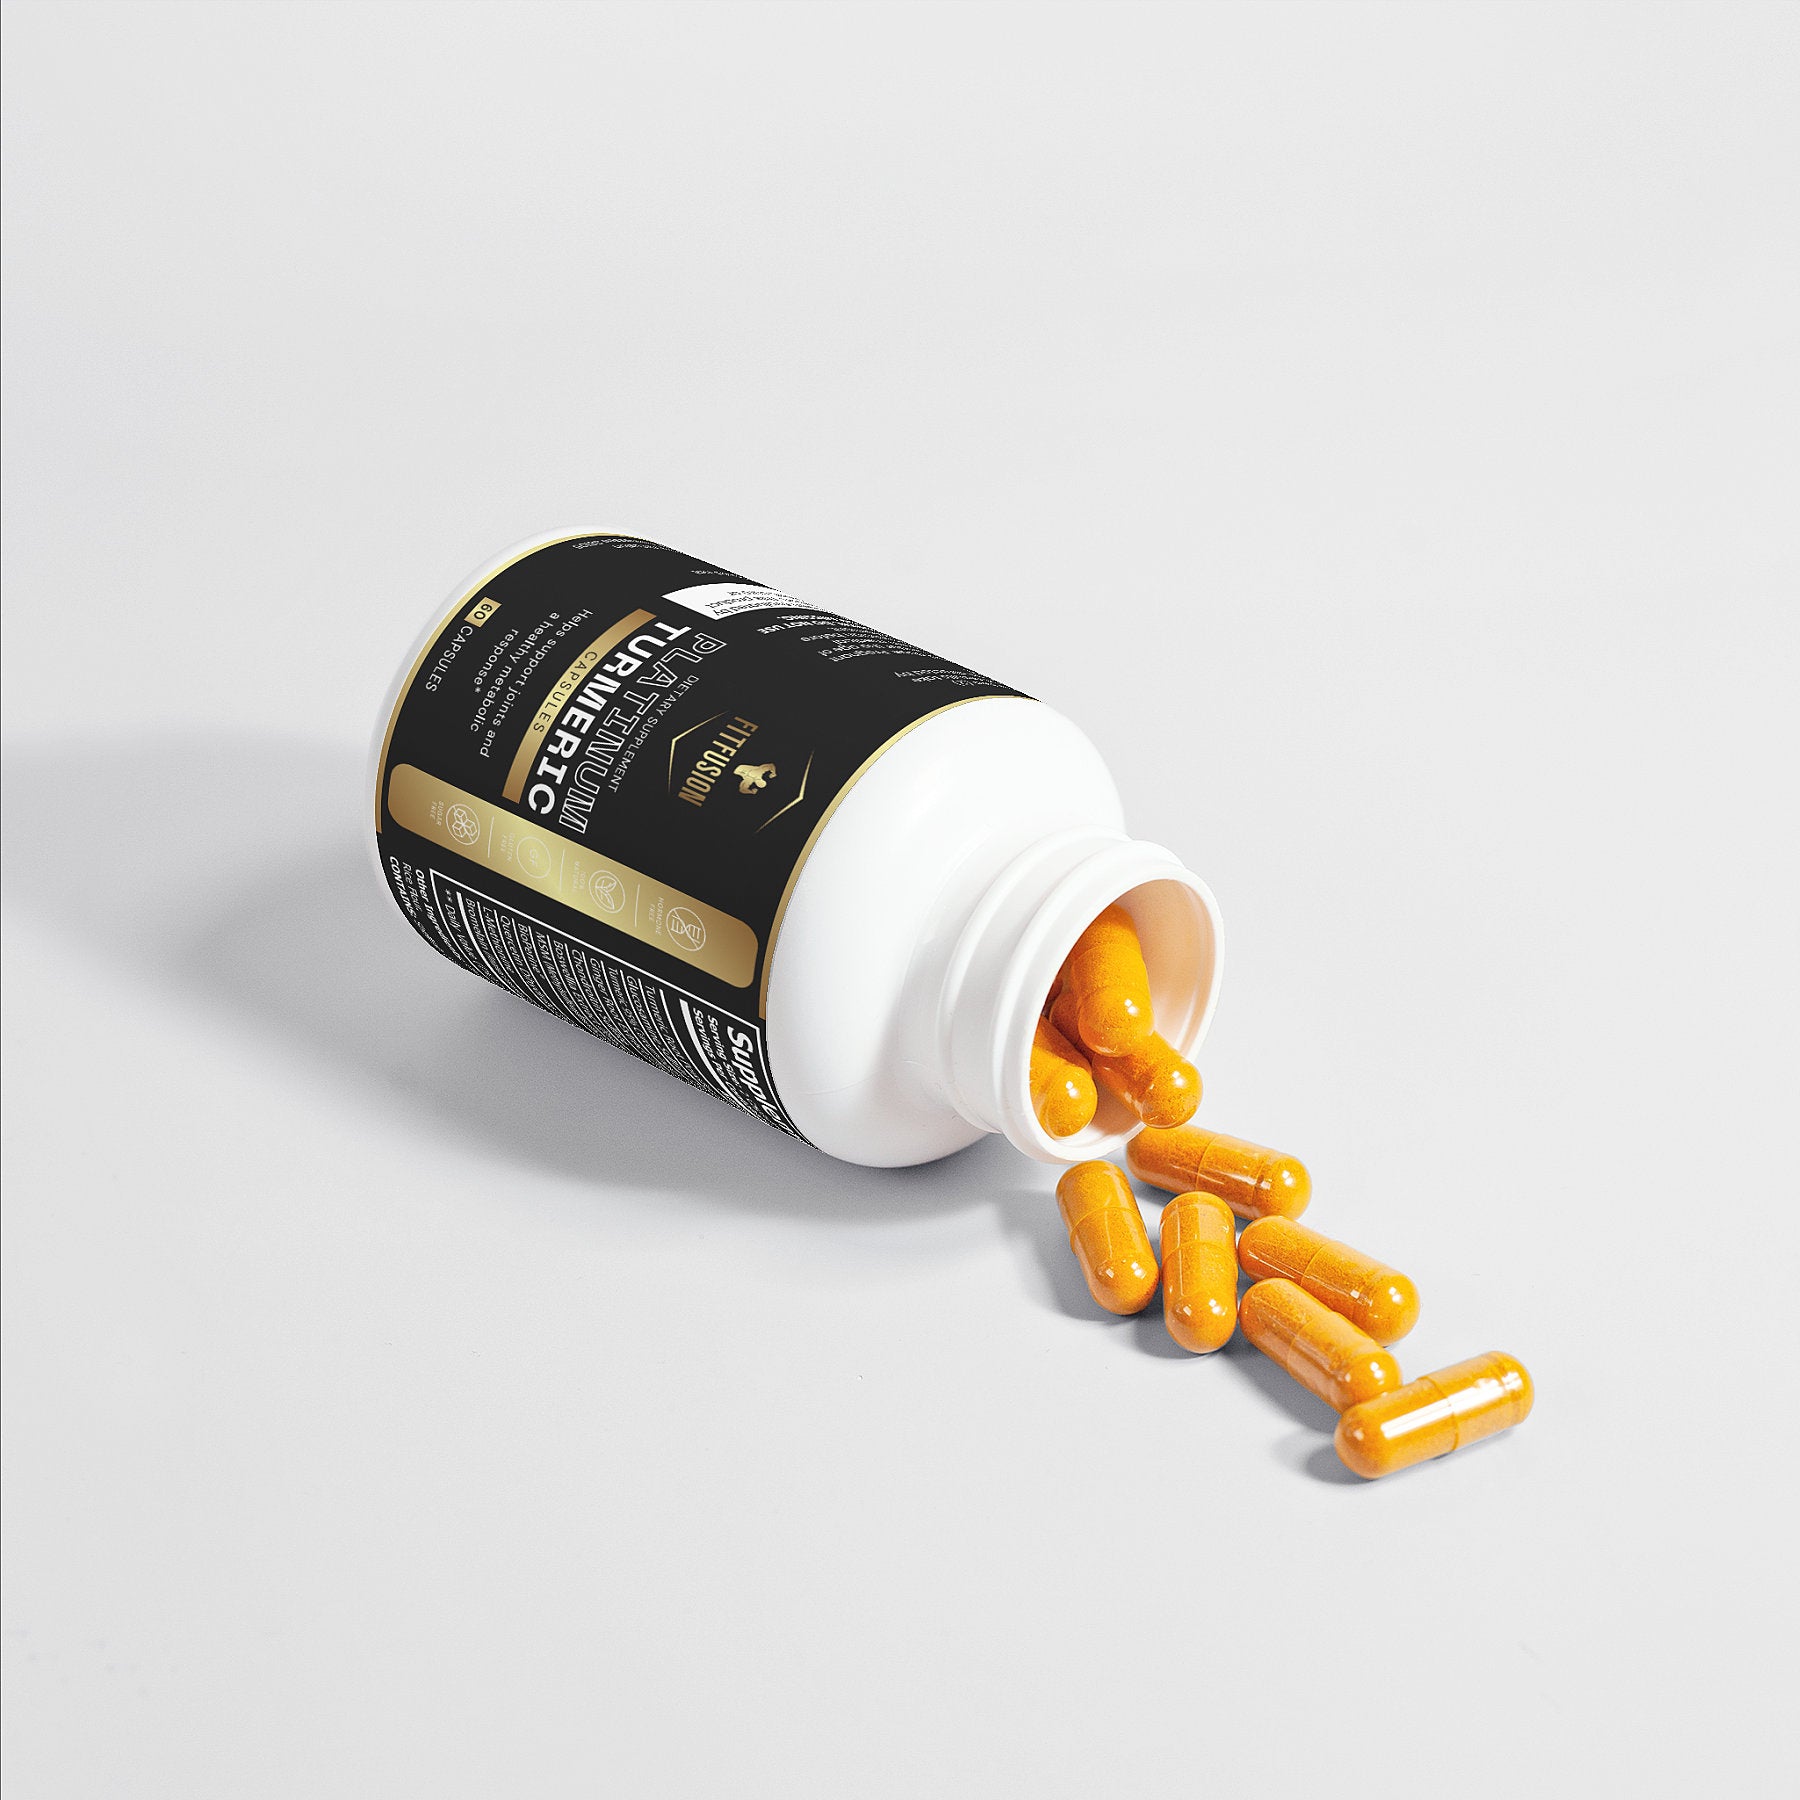 FitFusion Platinum Turmeric - Highly Beneficial Natural Extracts